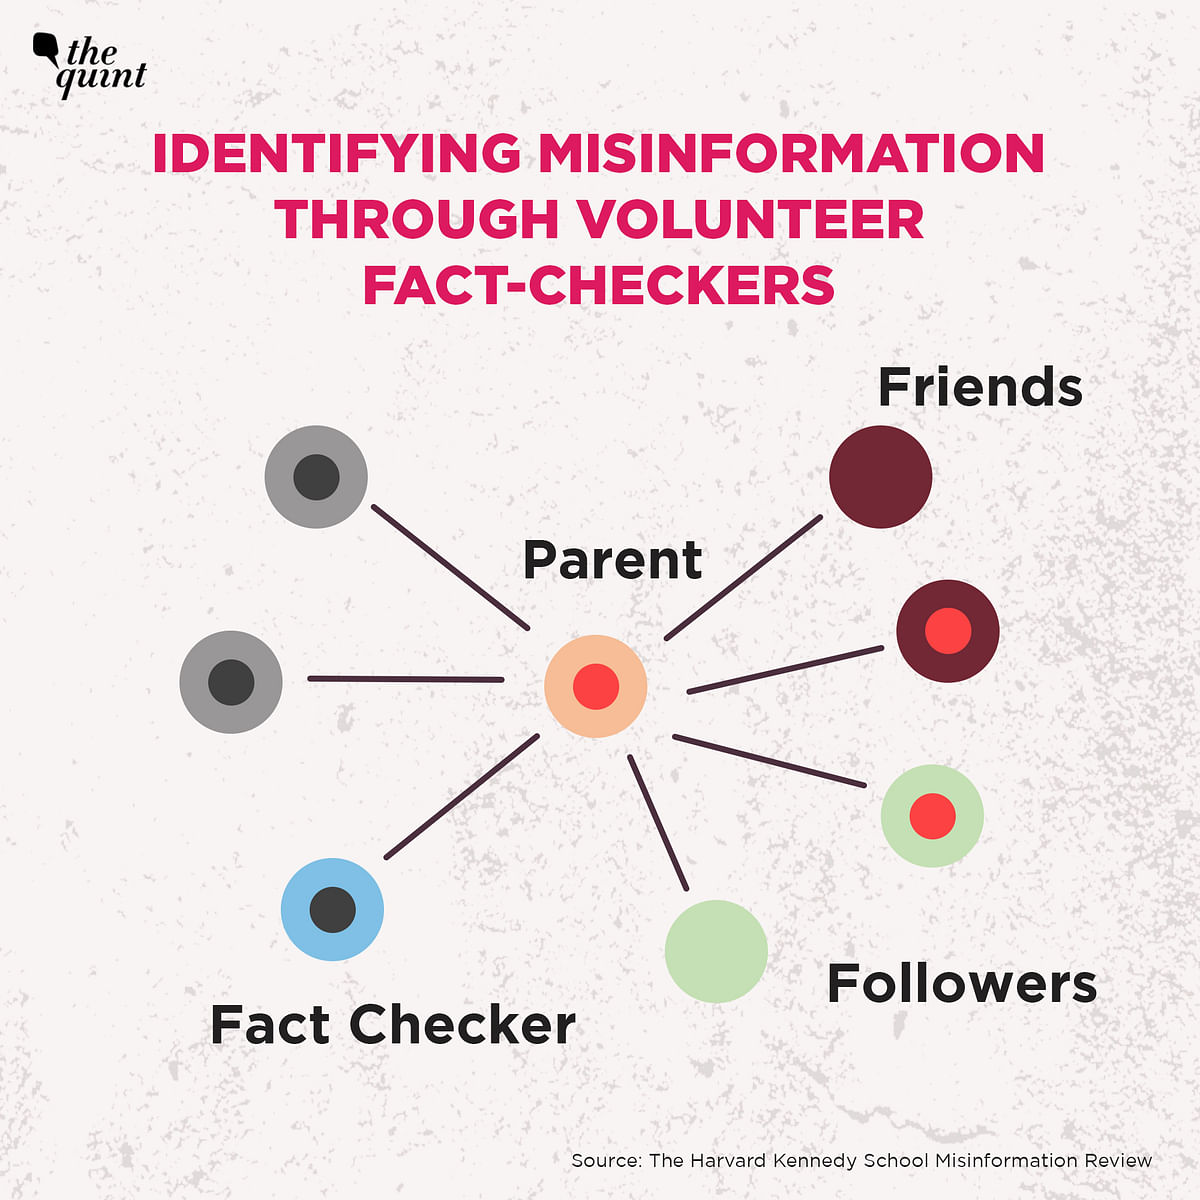 Studies show that volunteer fact-checkers can be a boon against fake news. With the right tools, you can help too.